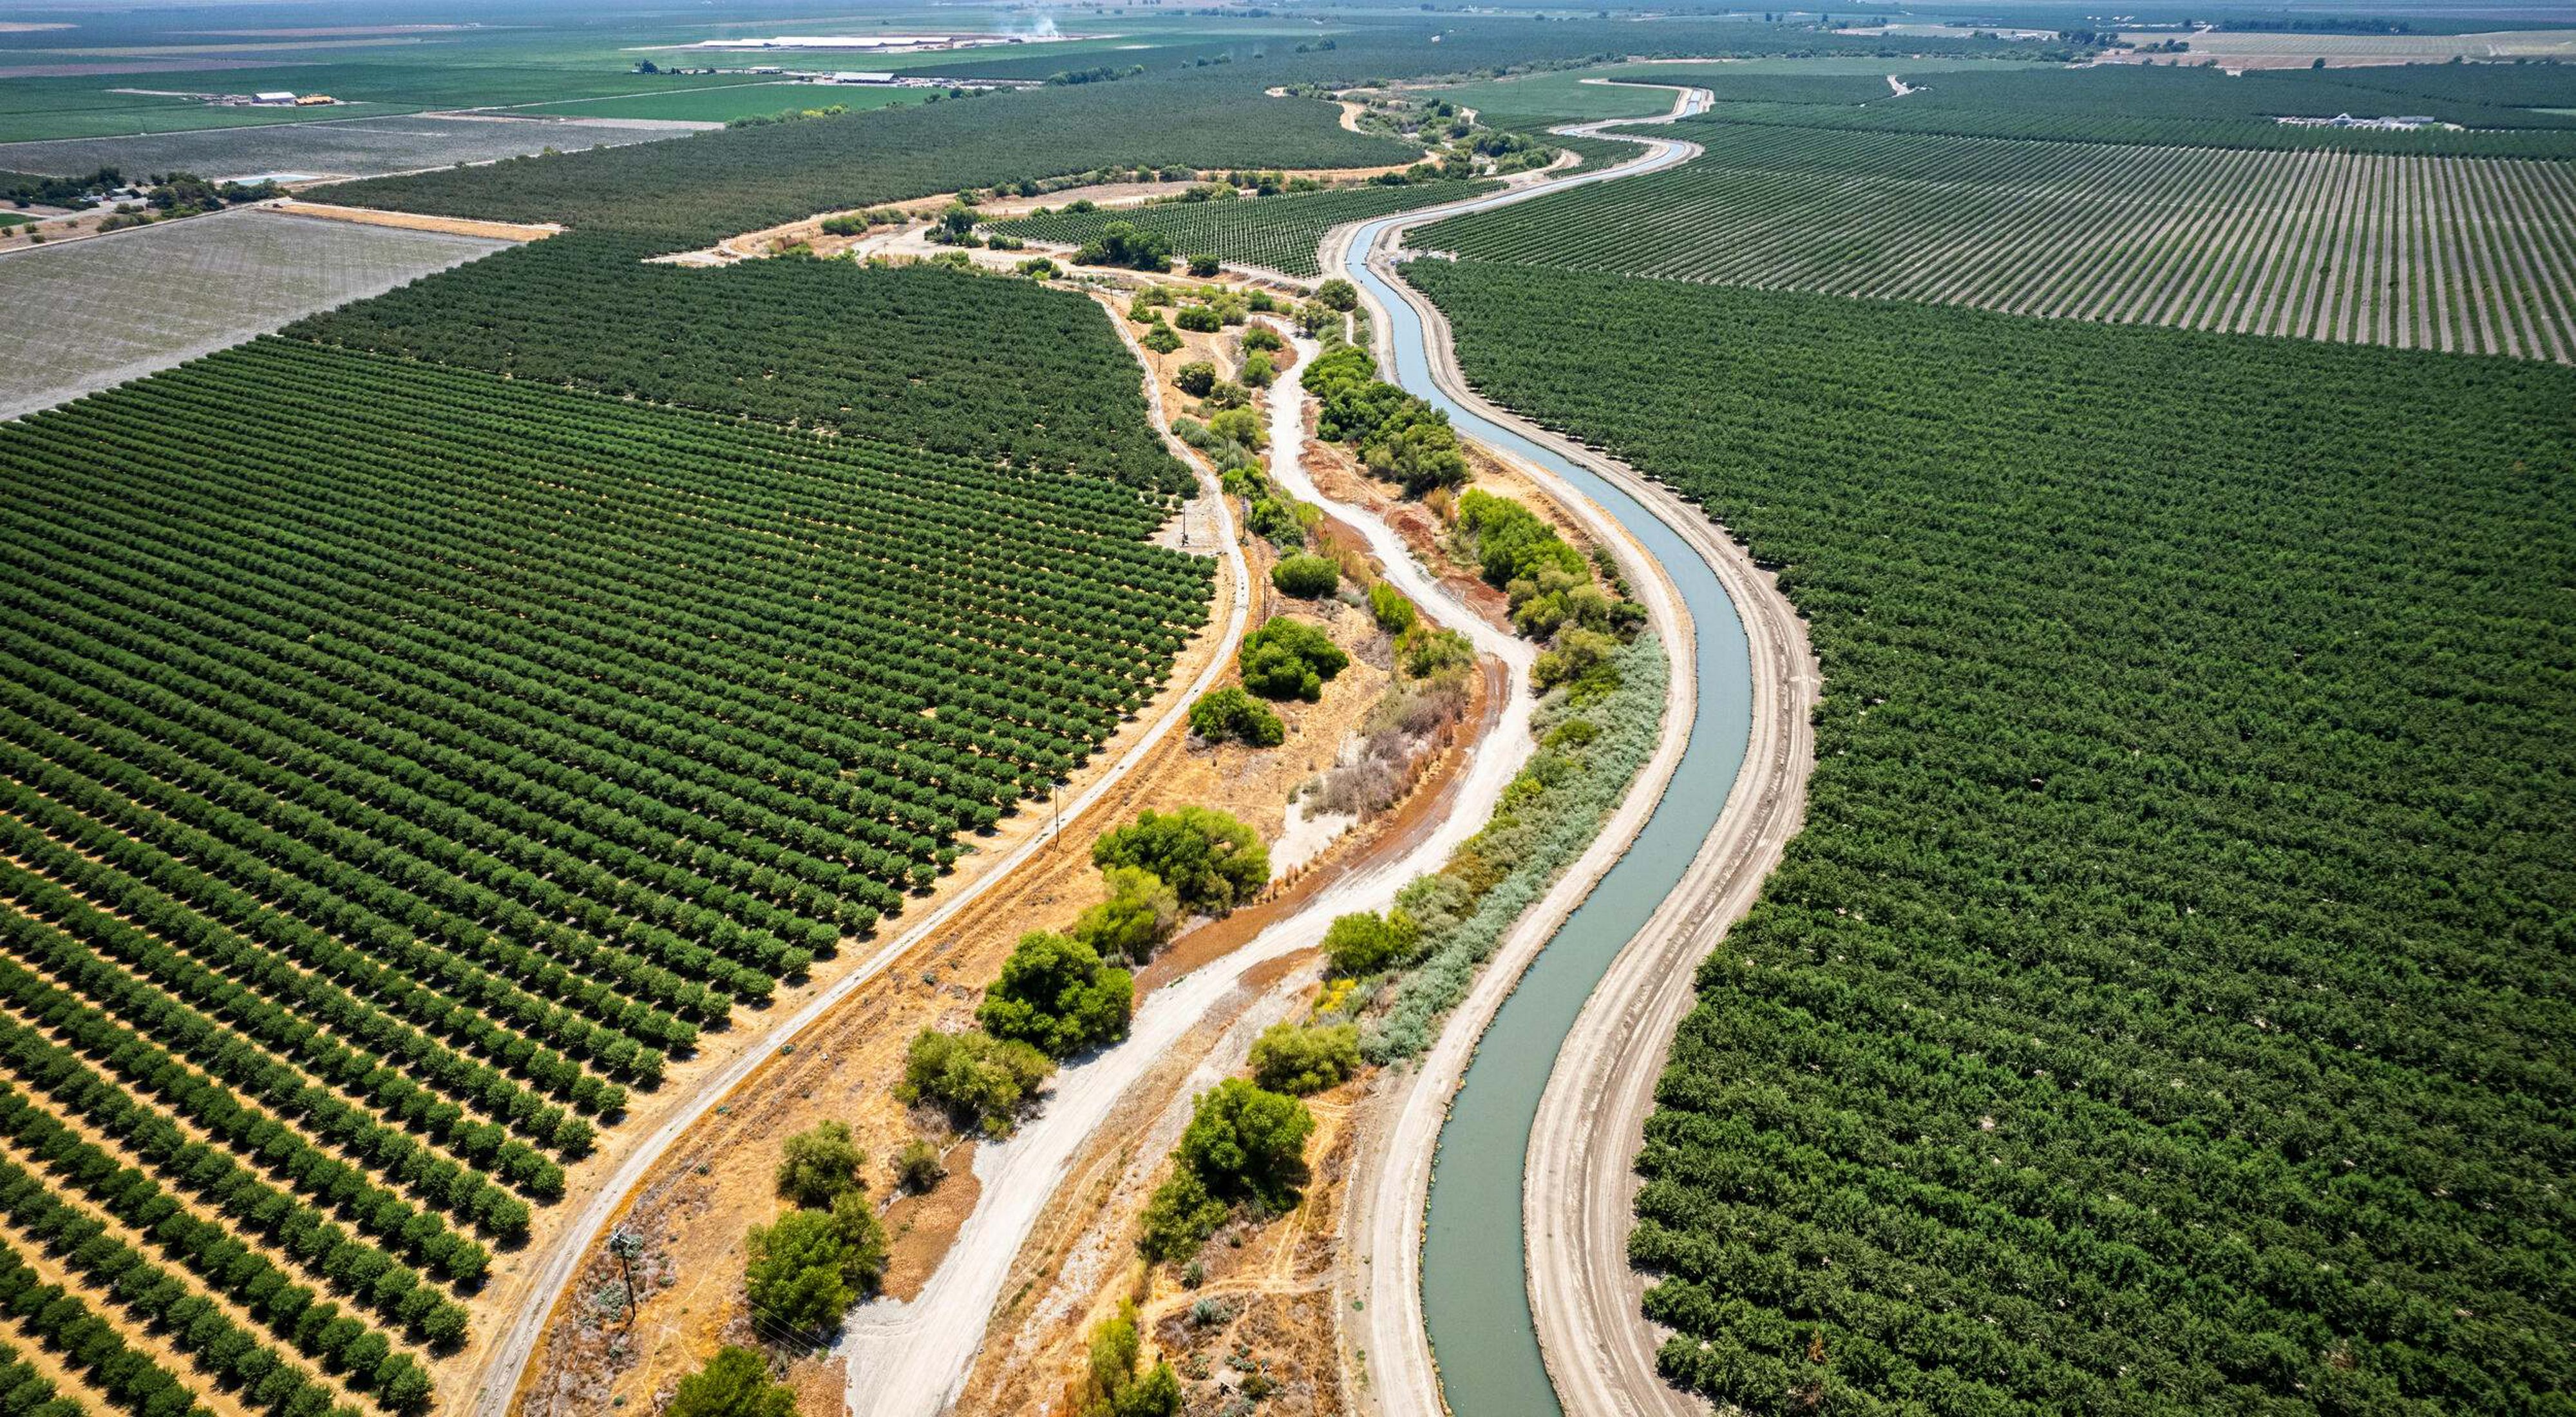 Aerial view of irrigation canal winding through rows of agricultural crops in a field.